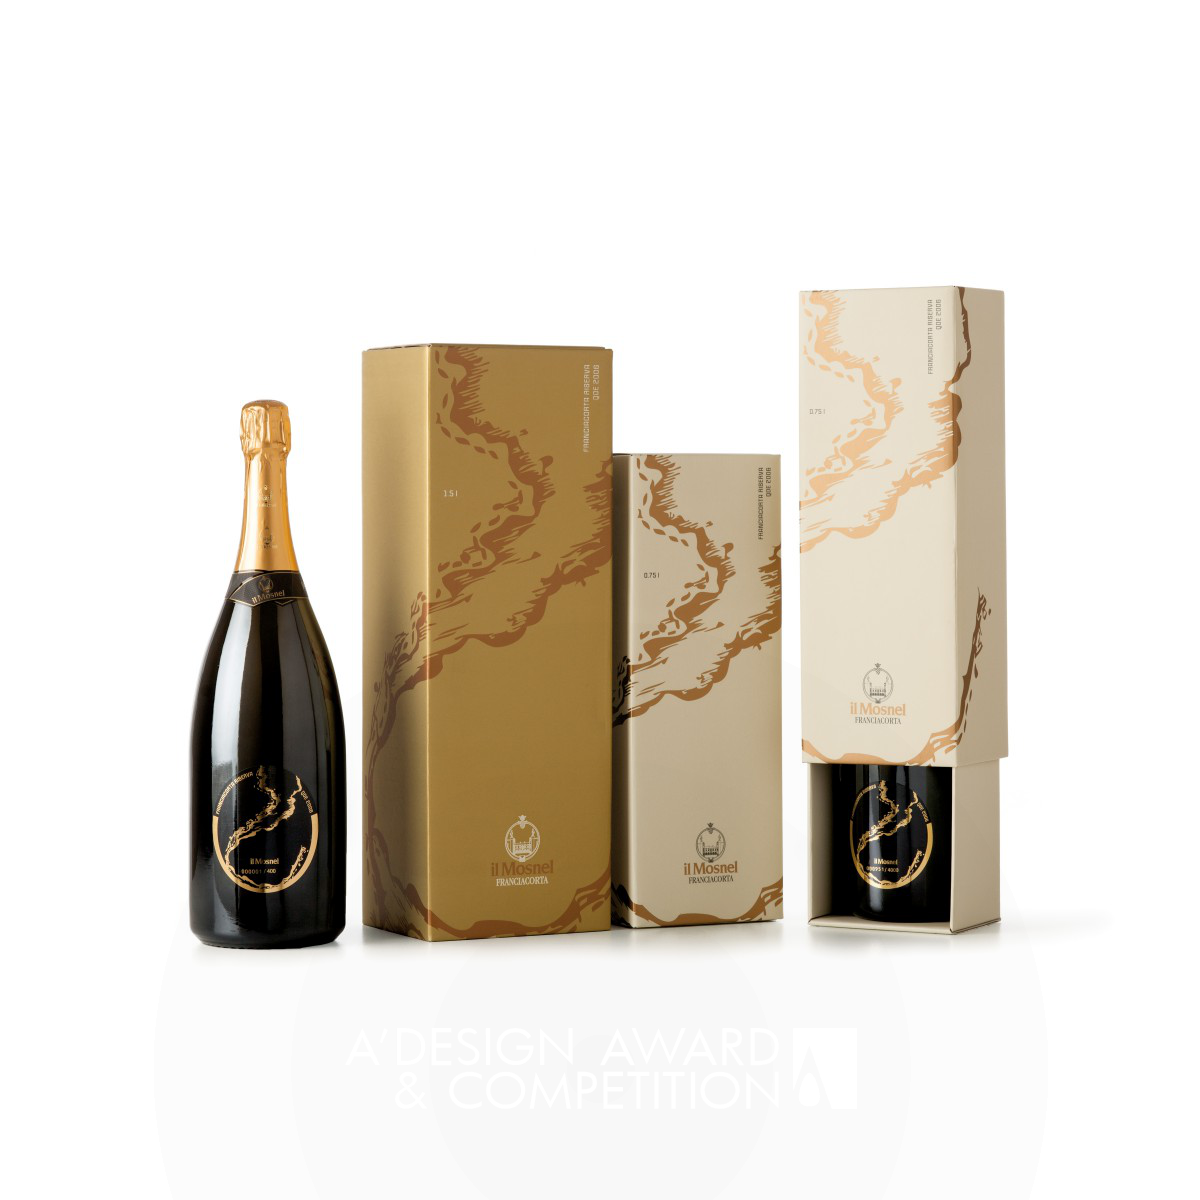 Laura Ferrario wins Platinum at the prestigious A' Packaging Design Award with Il Mosnel QdE 2012 Sparkling Wine Label and Pack.